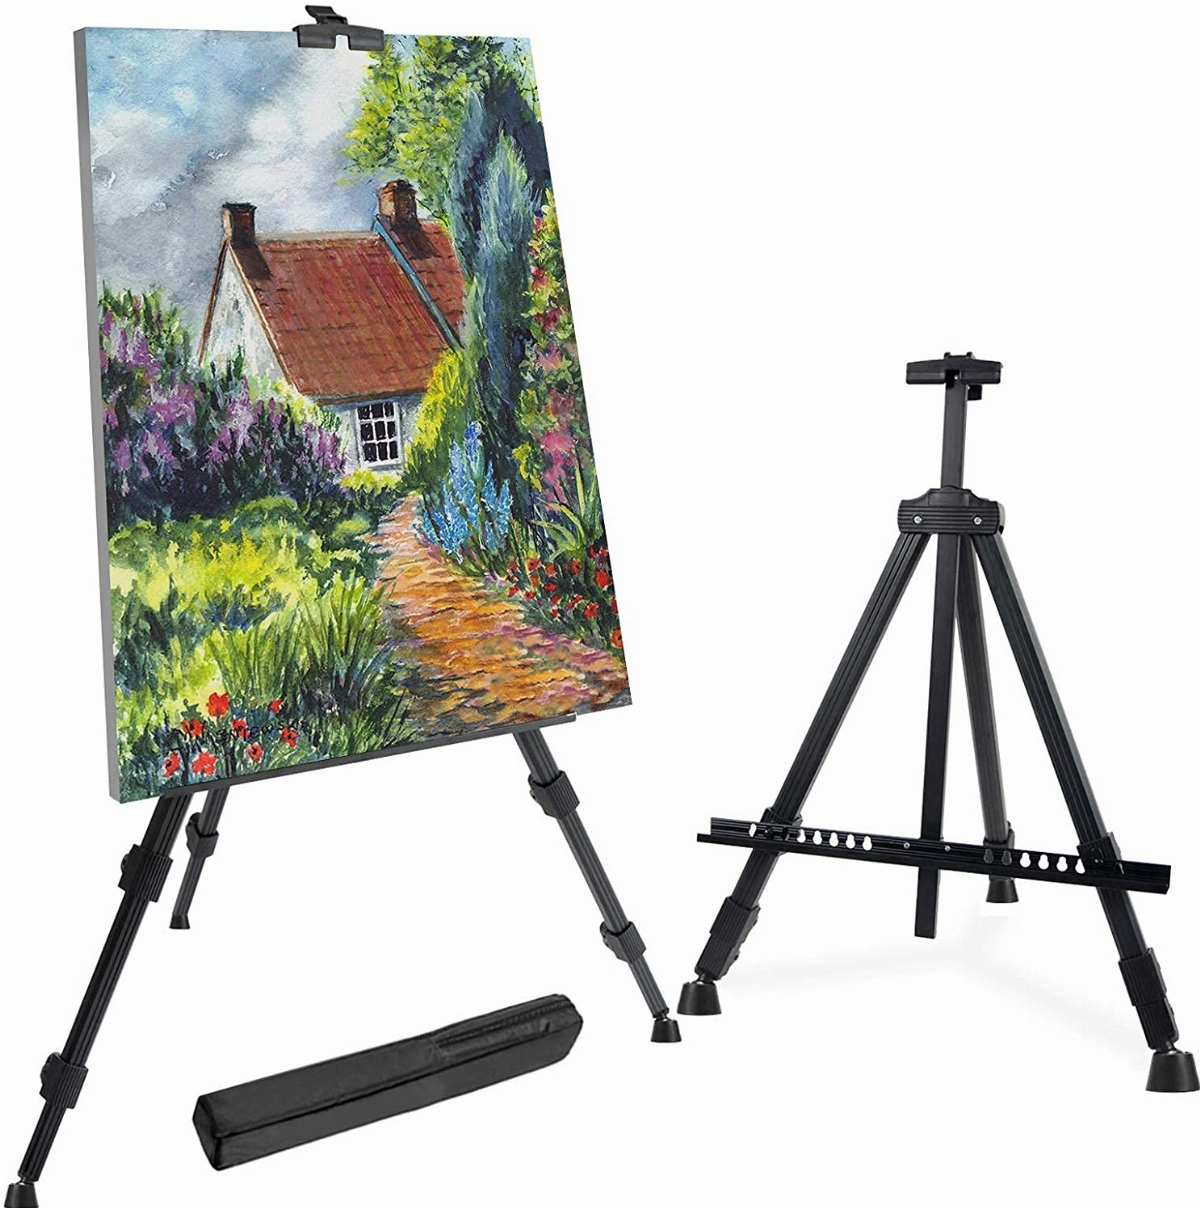 RRFTOK Metal Tripod Adjustable Easel for Painting Canvases Height from 21 to 66with Reinforced Triangle,Carry Bag for Table-Top/Floor Drawing and Didplaying Artist Easel Stand 